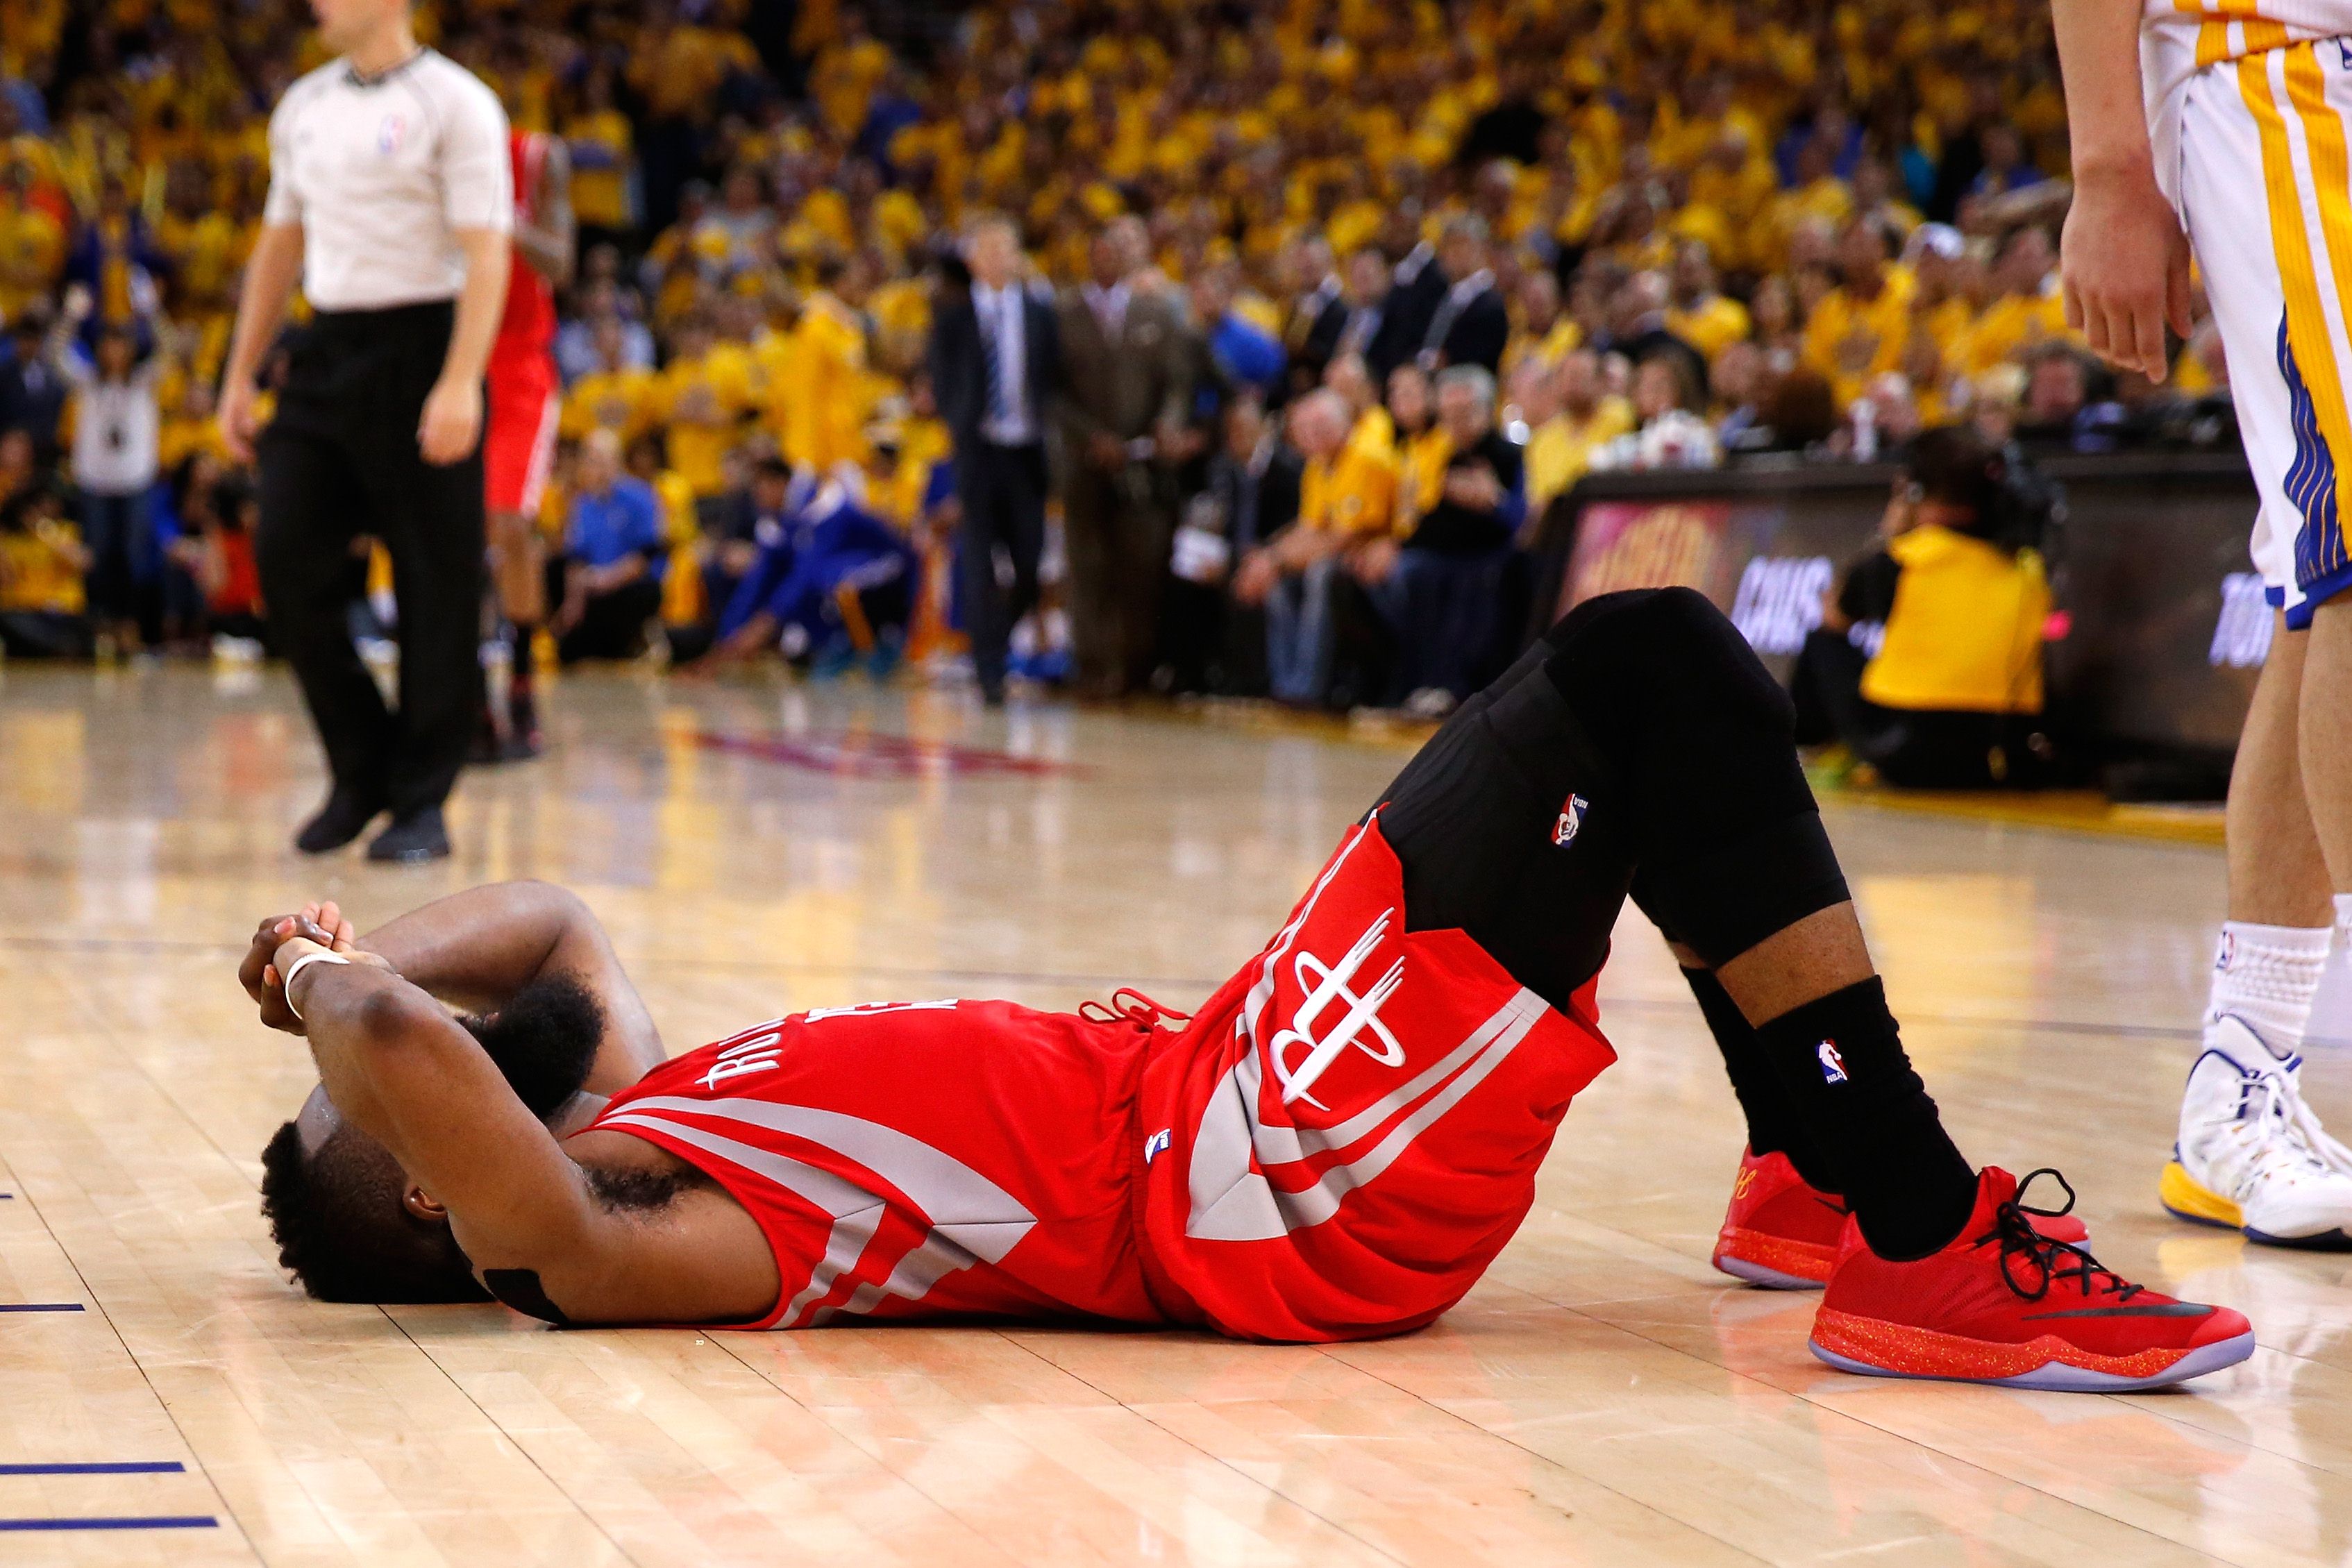 James Harden of the Houston Rockets lies slumped on the court after being denied a game-winning shot against the Golden State Warriors in game two of the Western Conference finals. Photo: AFP